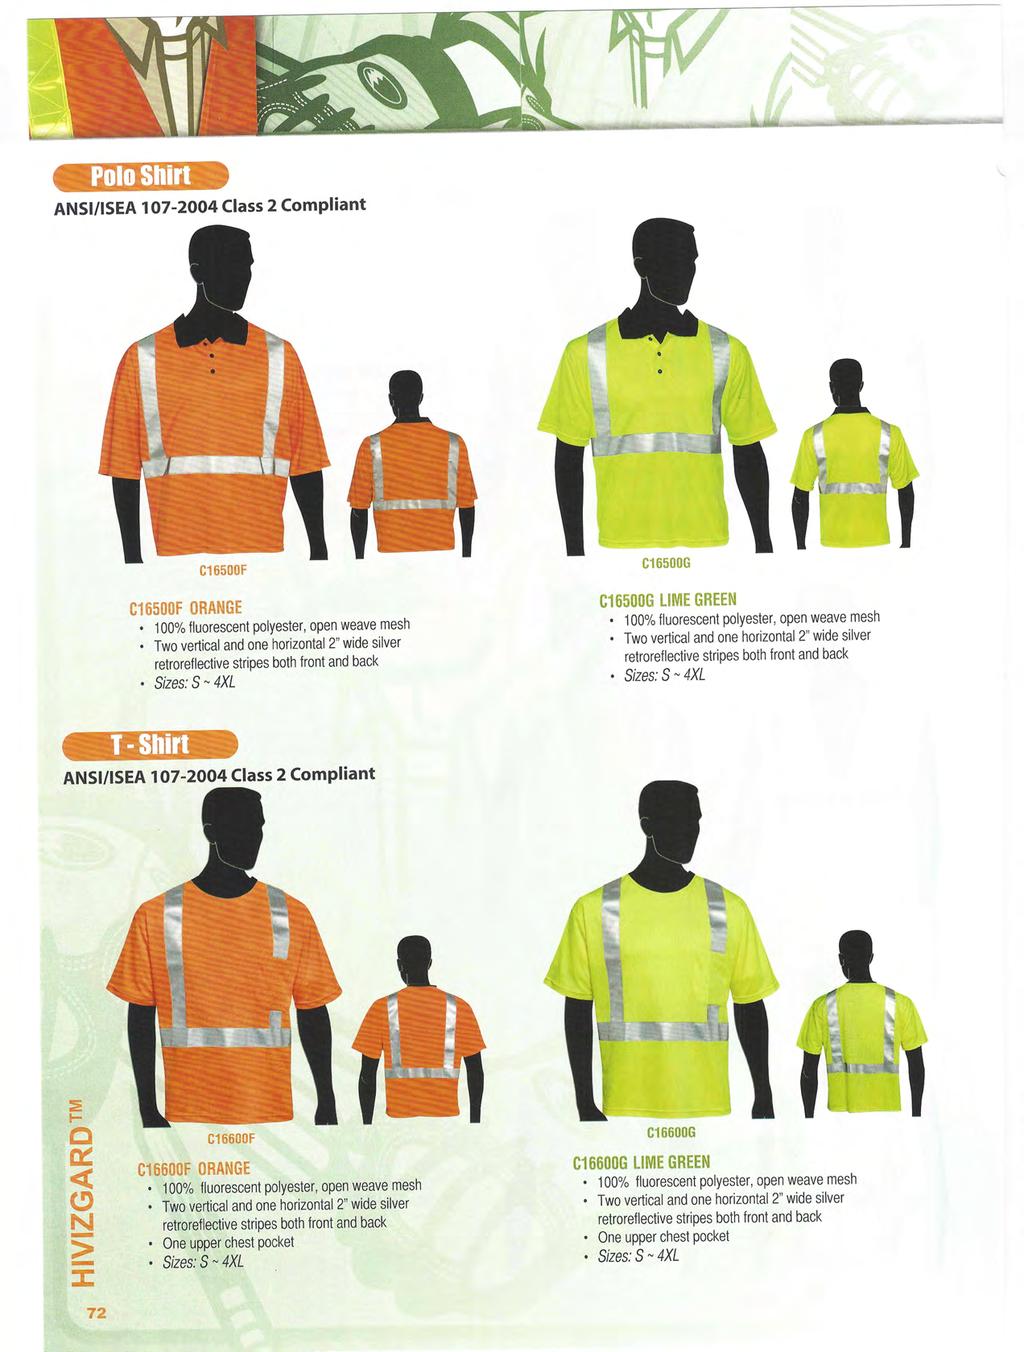 -ANSI/ISEA 17-24 Class 2 Compliant C165F C165F ORANGE 1% fluorescent polyester, open weave mesh Two vertical and one horizontal 2 wide silver retroreflective stripes both front and back Sizes: S 4XL